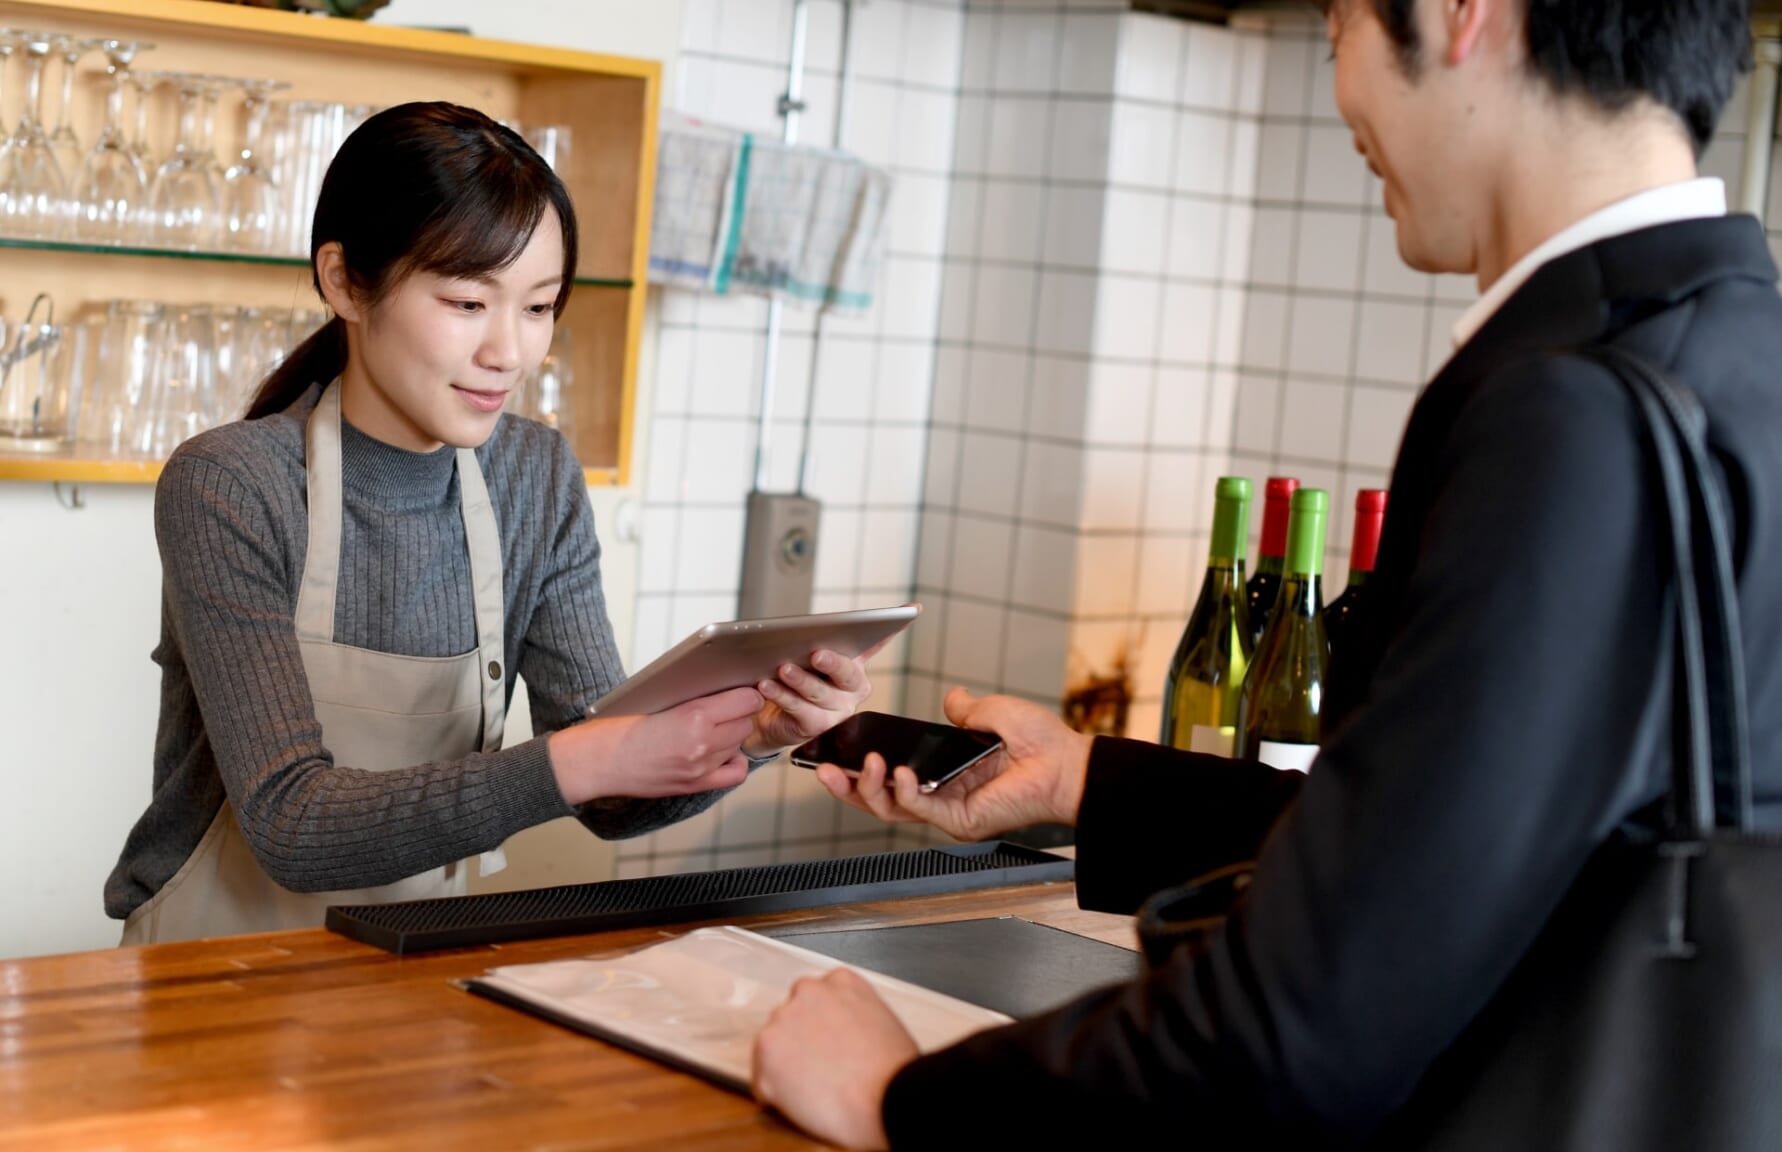 Mobile payment in Japan